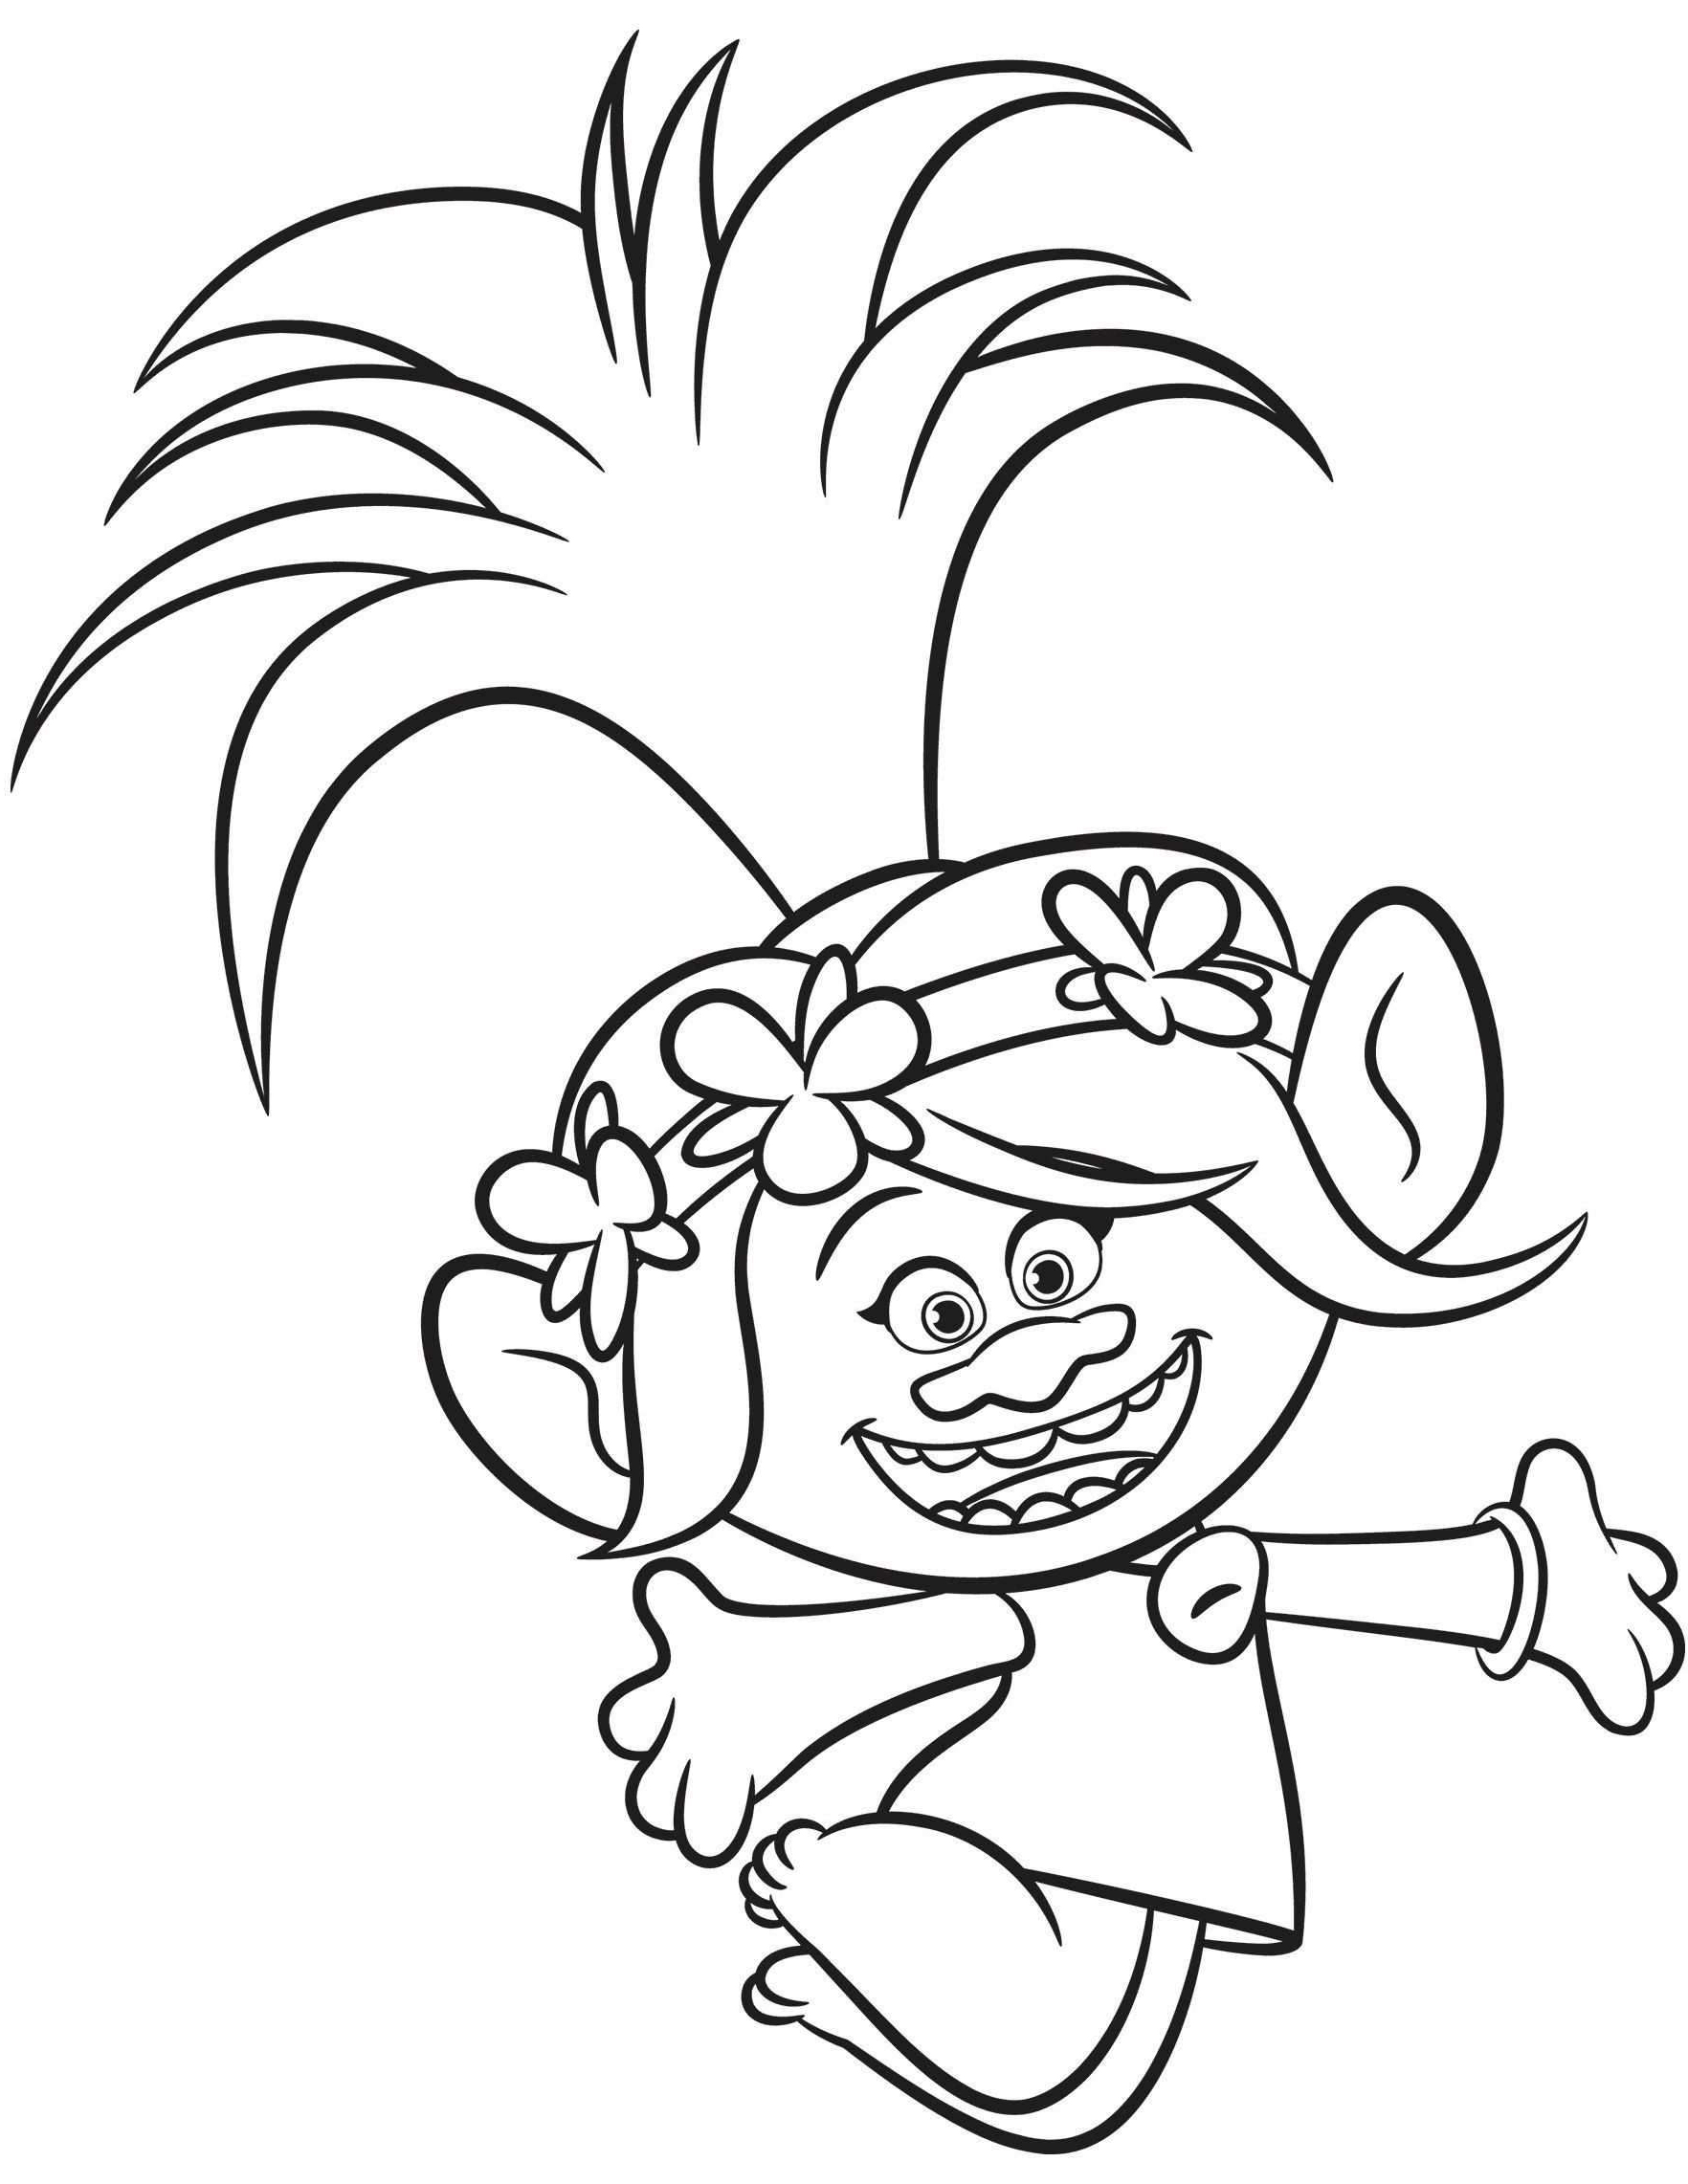 Poppy Coloring Pages   Best Coloring Pages For Kids